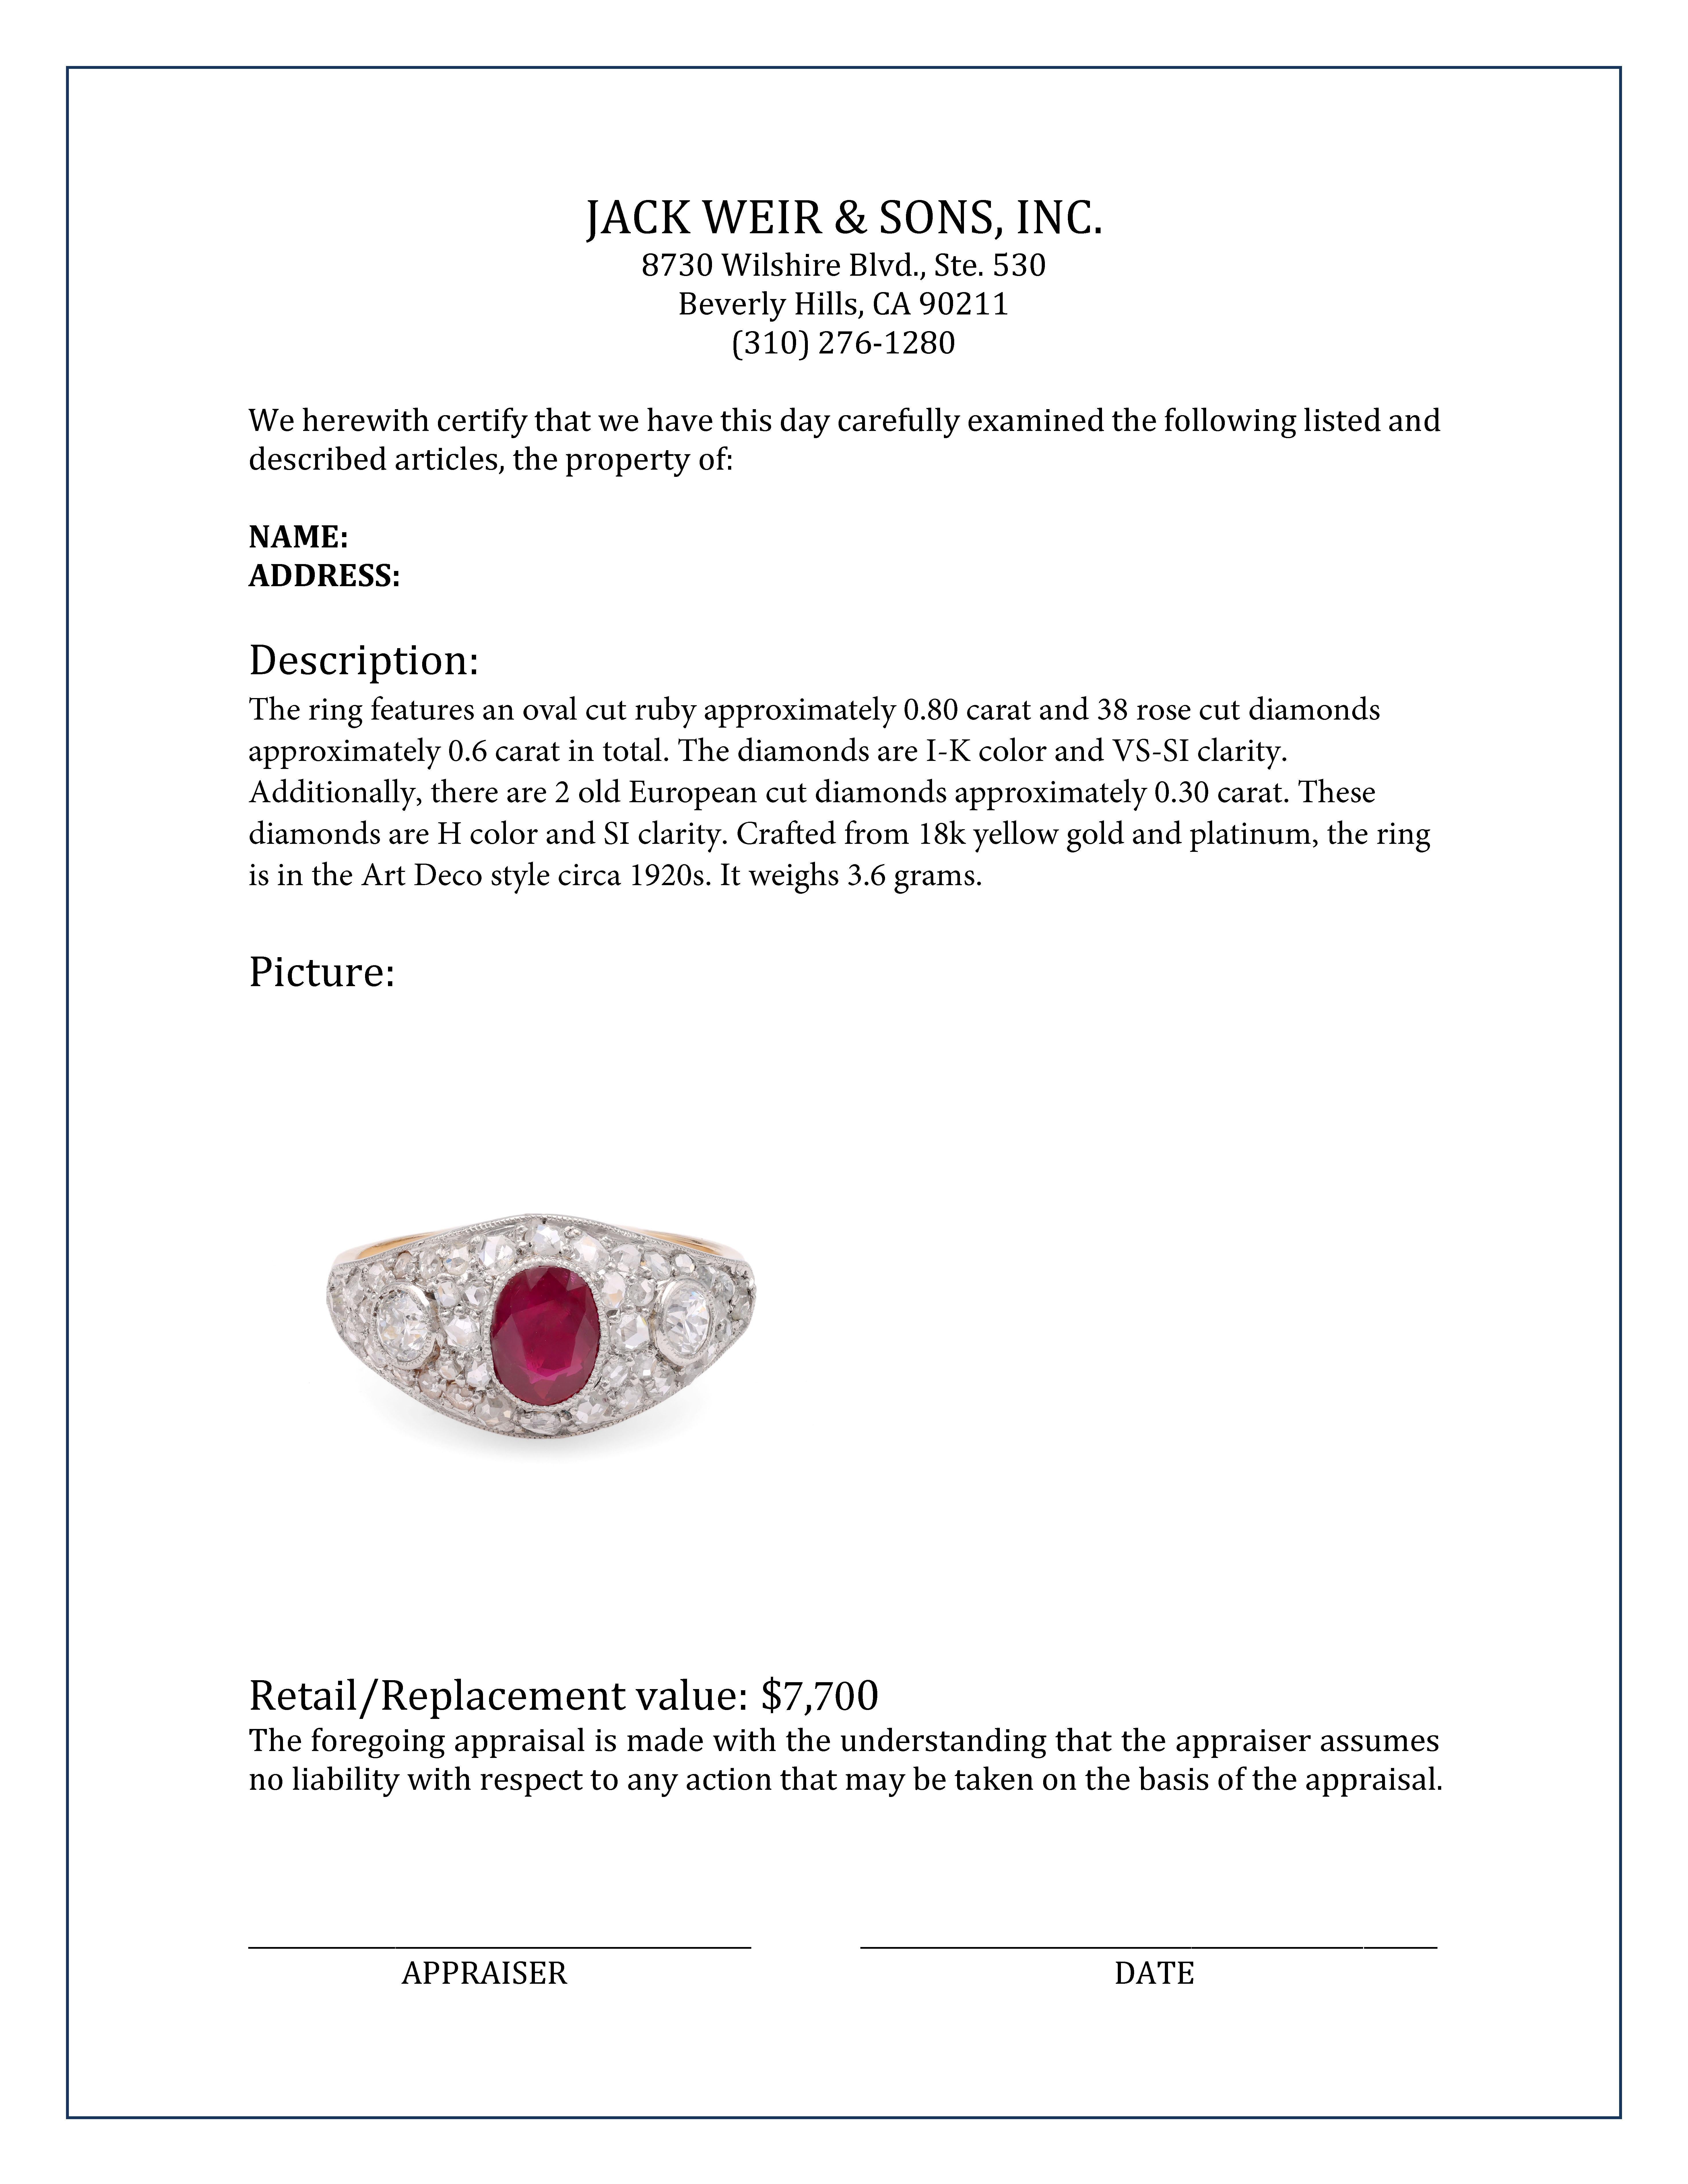 Oval cut ruby approx 0.80 carat 
38 rose cut diamonds approx 0.6 carat
I-K color 
VS-SI clarity 
2 old european cut diamonds approx 0.30 carat
H color
SI clarity 
18k yellow gold and platinum 
Art Deco style circa 1920s 
Rings size 6 and can be